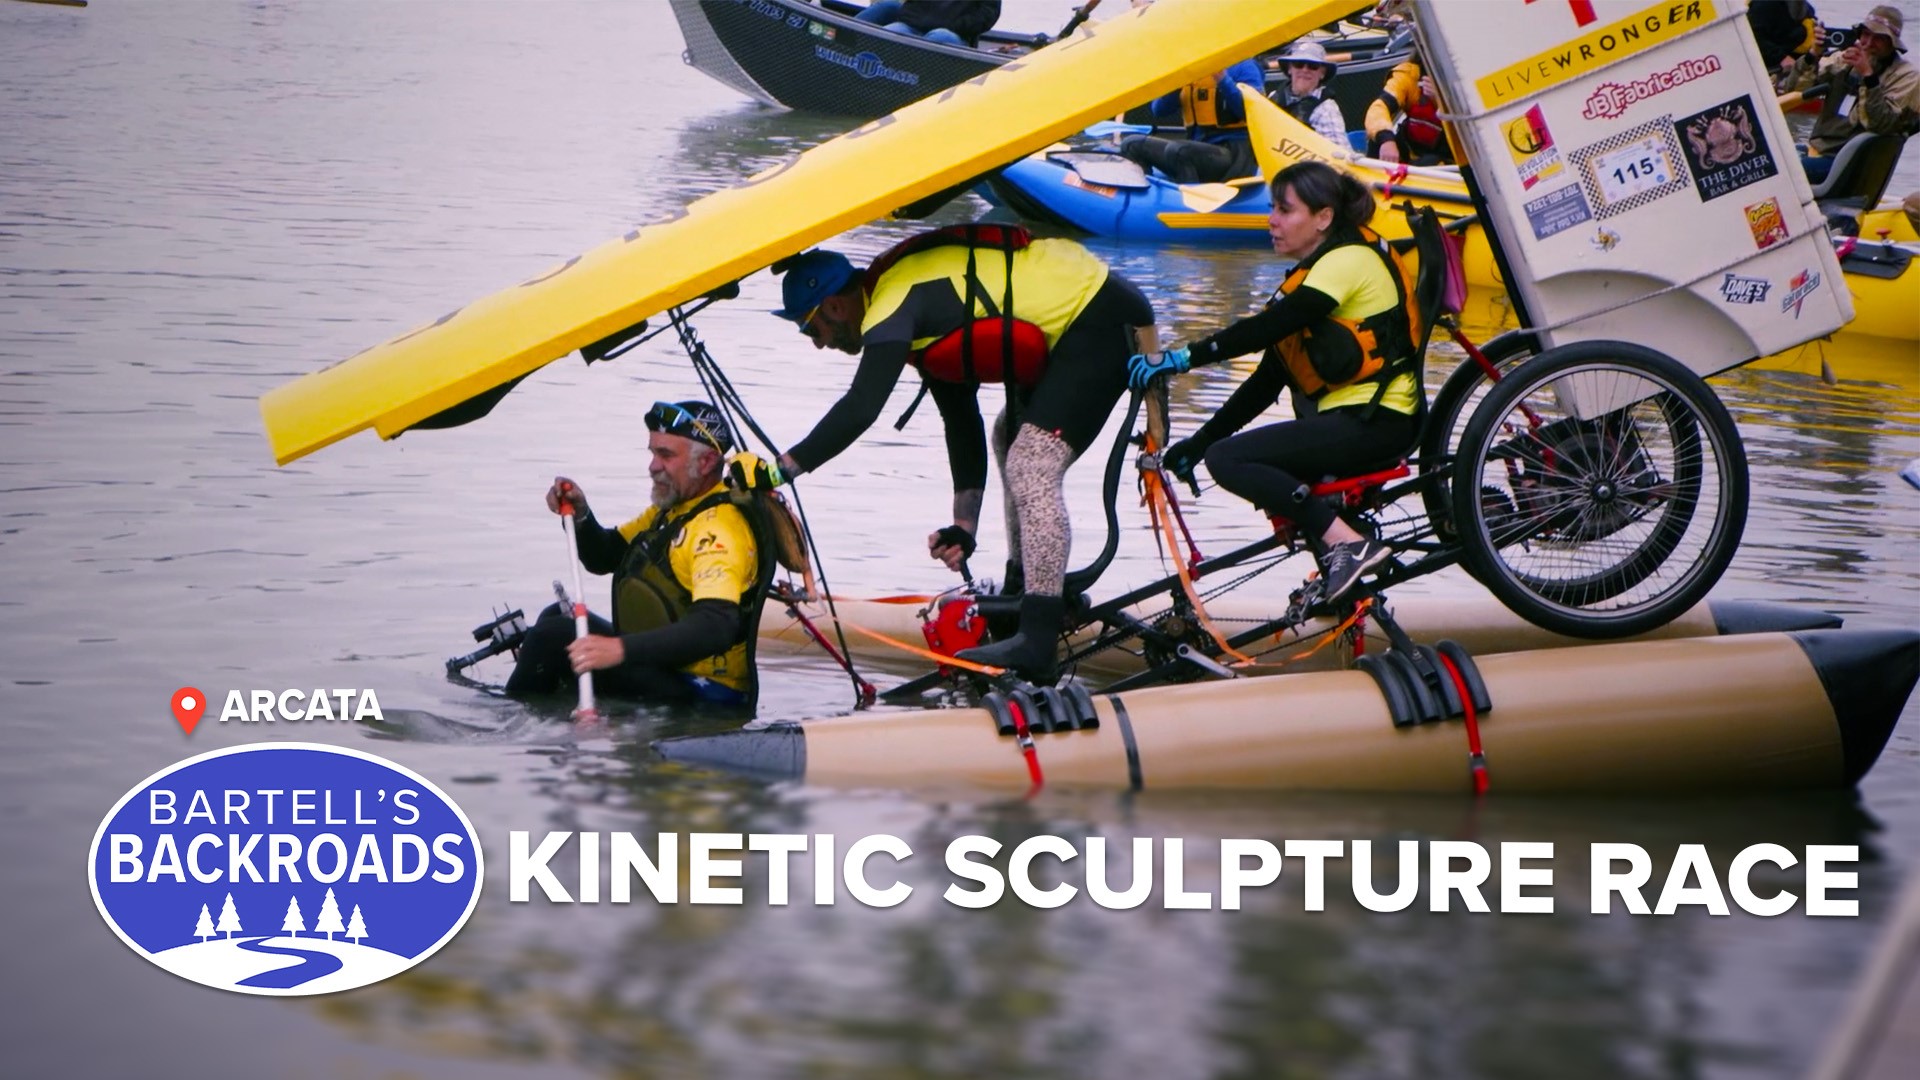 Artists propel kinetic sculptures more than 50 miles over land, sand, water, and mud in a chaotic race to the finish line.